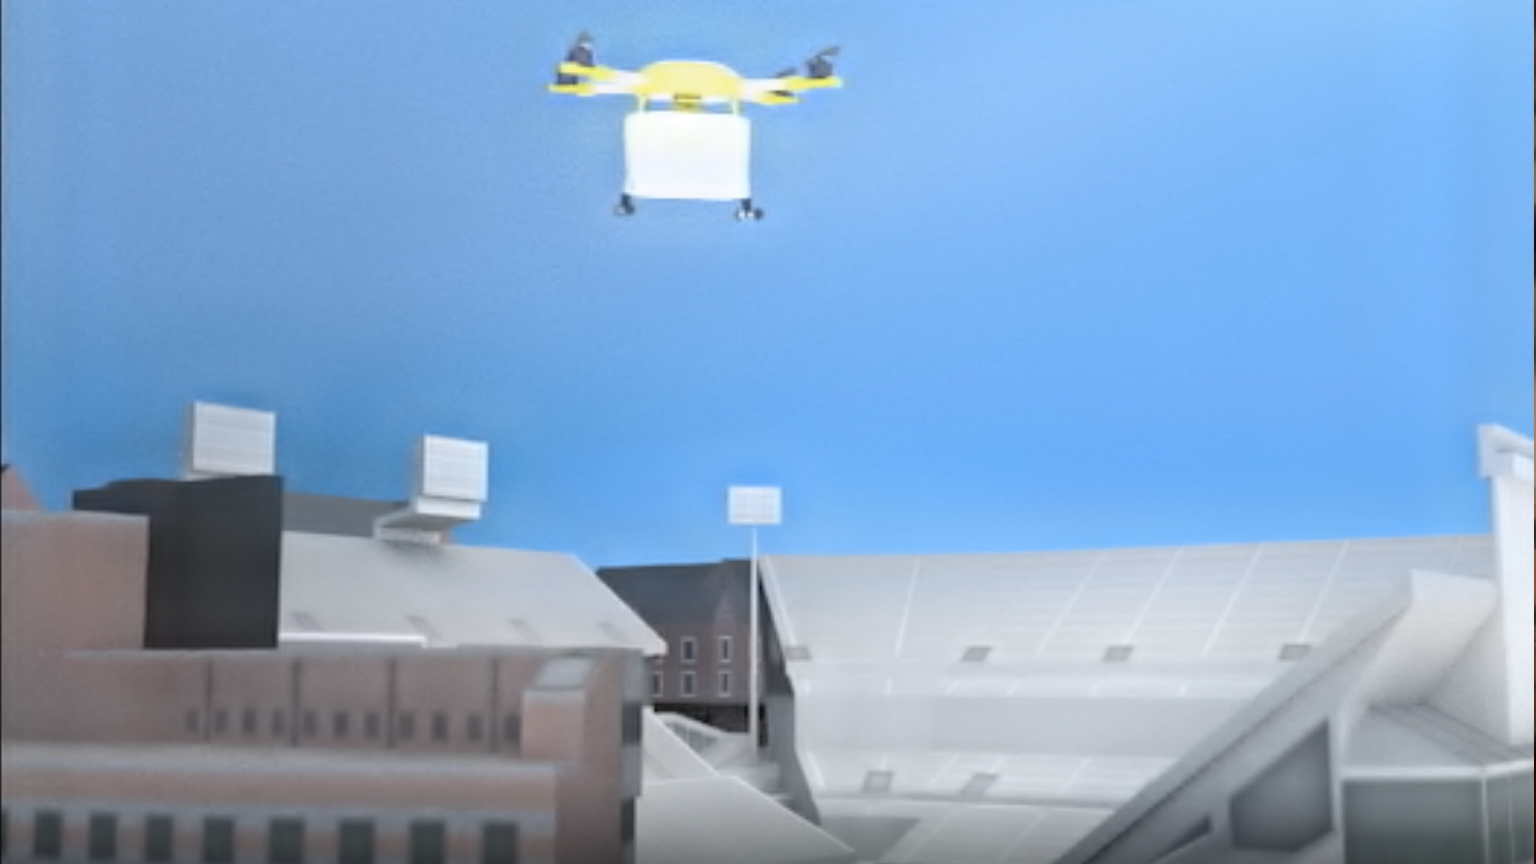 Render of a drone flying over the GT stadium 